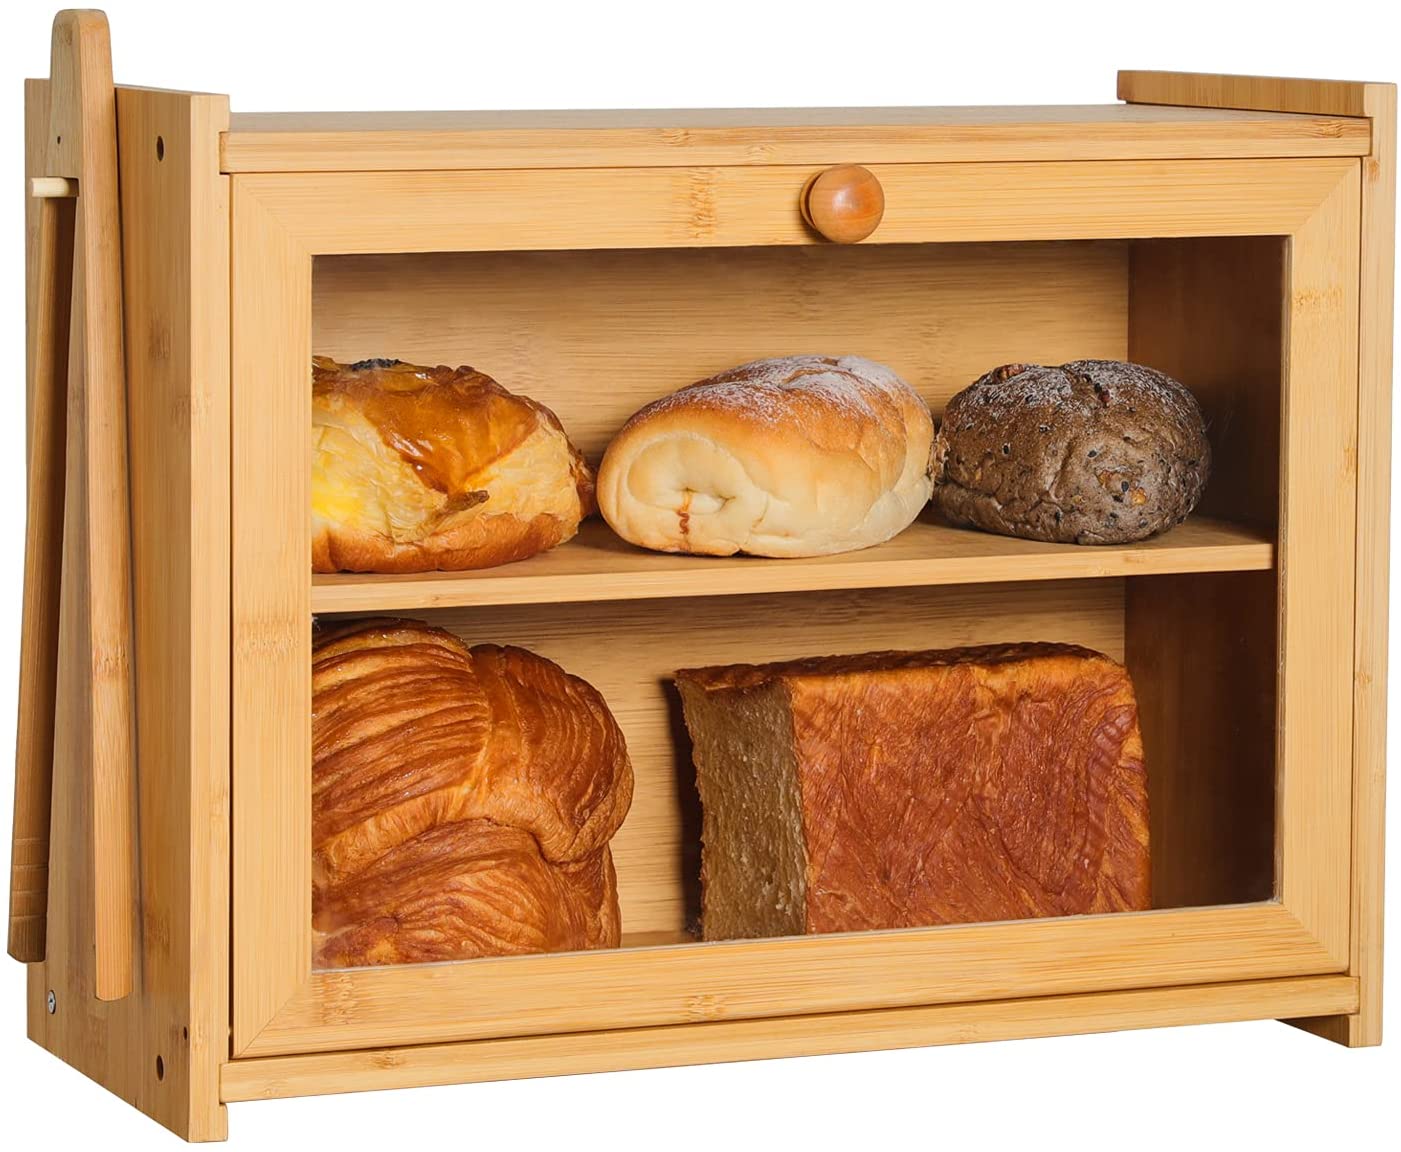 Self-Assembly 2 Layer Wooden Bread Boxes for Kitchen Counter Extra Large PARANTA Large Bamboo Bread Box for Kitchen Countertop Farmhouse Bread Holder with Clear Window and Shelf